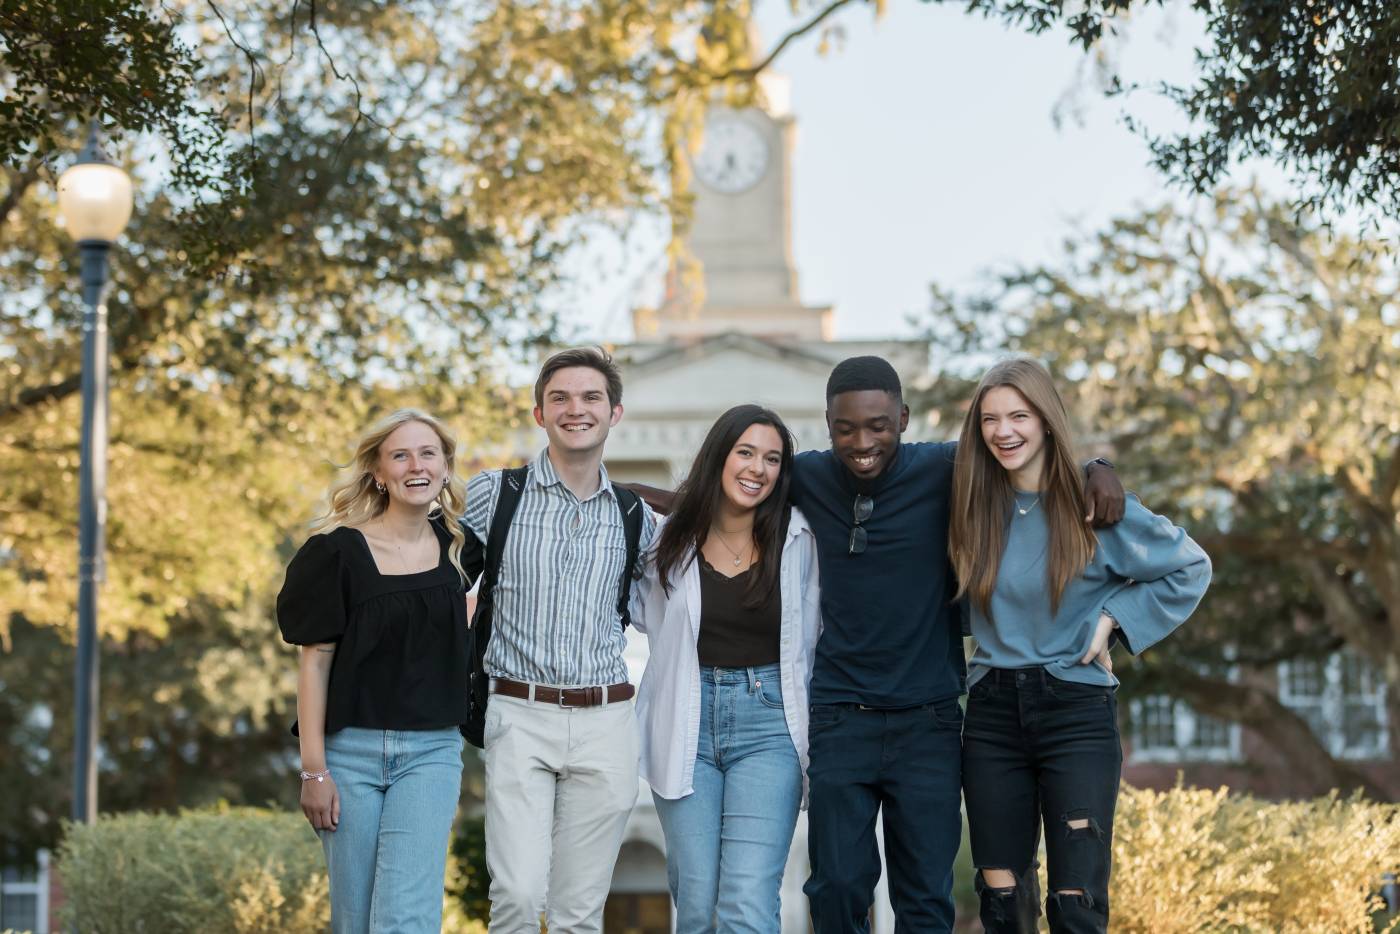 High school juniors and their relatives can interact with Mississippi College faculty, staff, and students and experience the Christian University's unique environment by participating in Junior Day at MC.